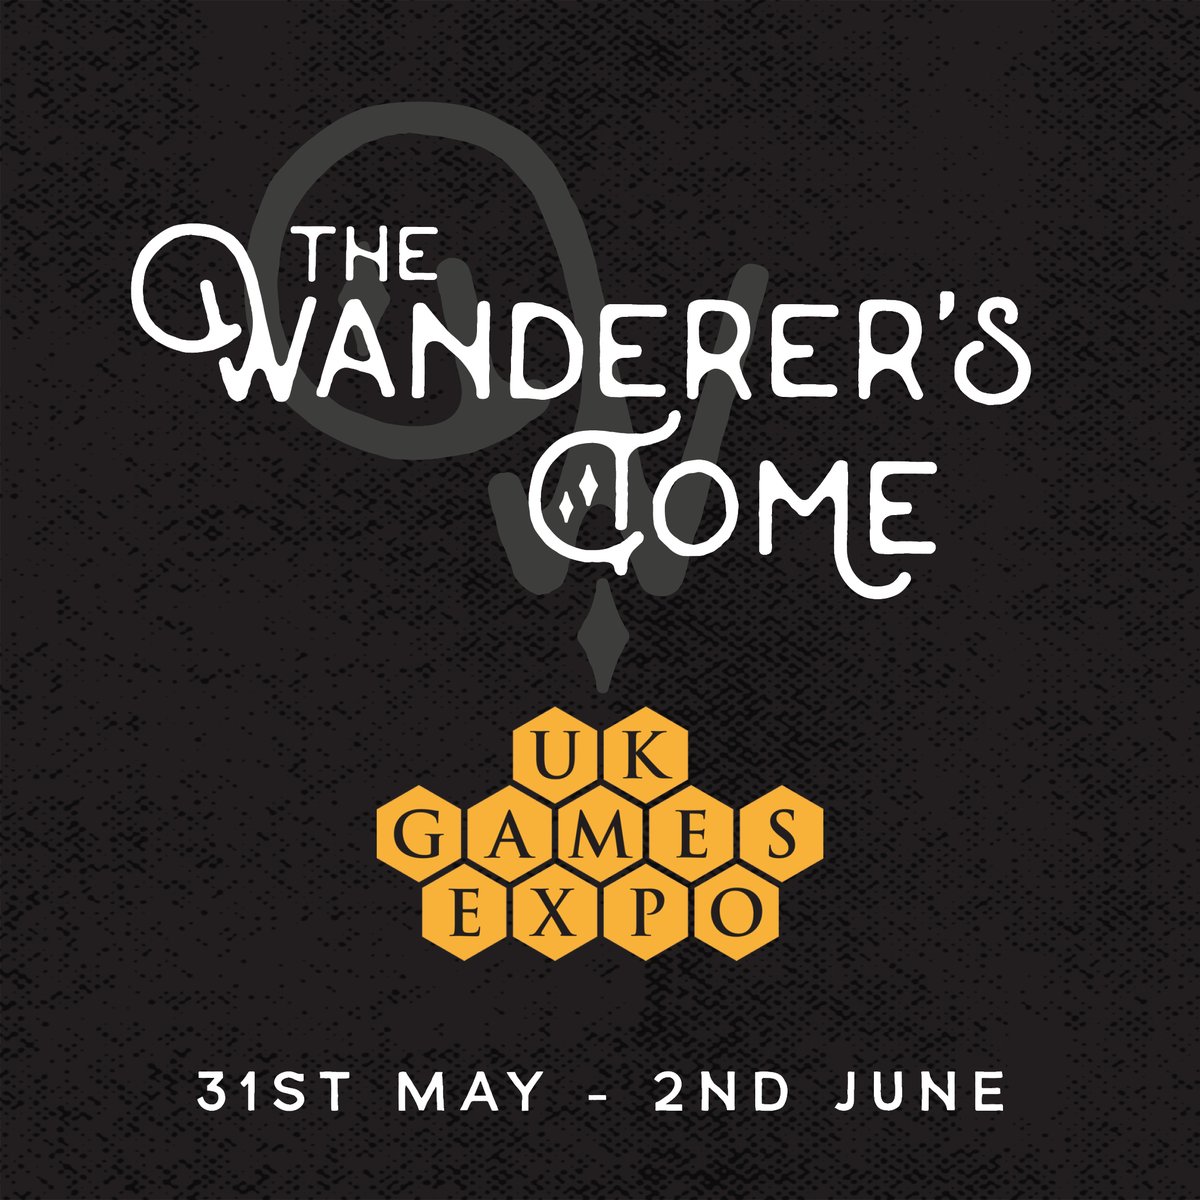 The Wanderer's Tome will be exhibiting at #UKGE this year! Our first big convention! 🫢 And there will be #Flabbergasted games being played throughout the weekend 💖 Grab your tickets for a game here: ukgamesexpo.co.uk/events/1828-ju… Be sure to come say hi at our stand 🎉